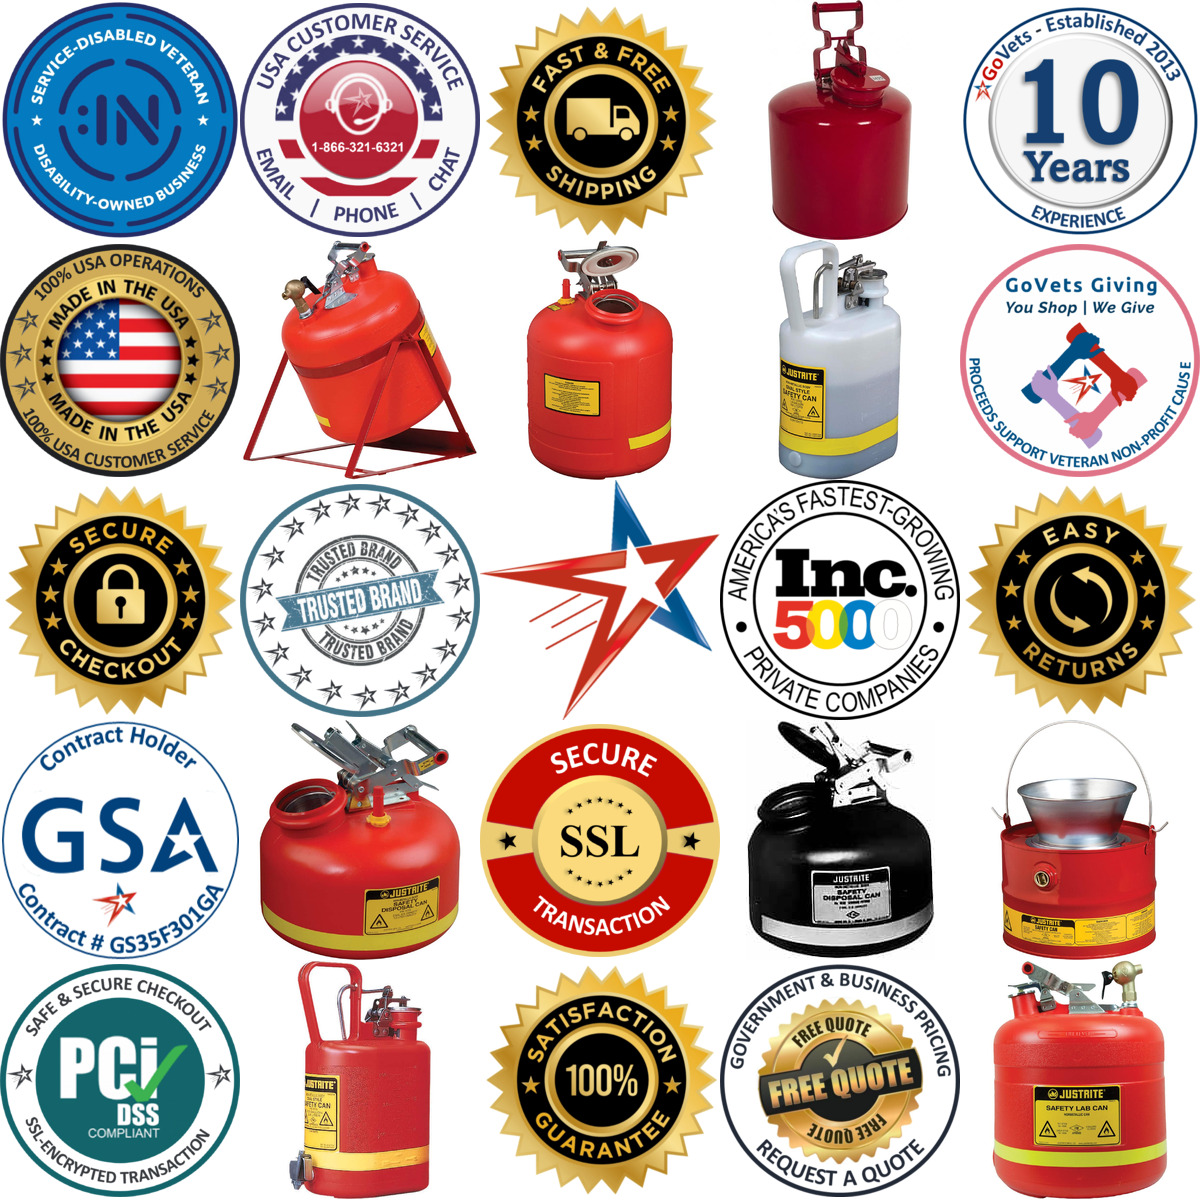 A selection of Safety Disposal Cans products on GoVets